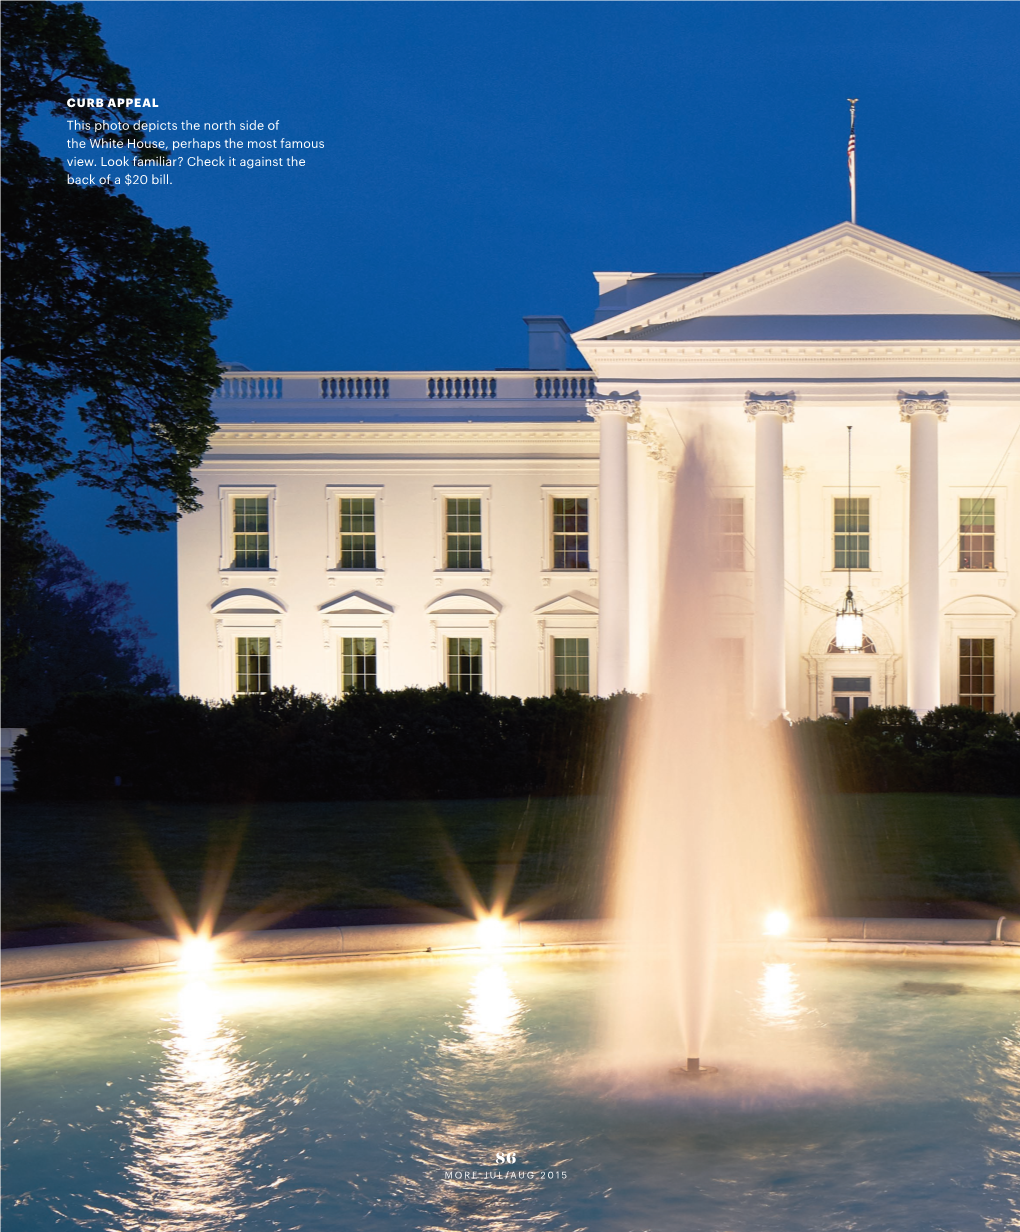 This Photo Depicts the North Side of the White House, Perhaps the Most Famous View